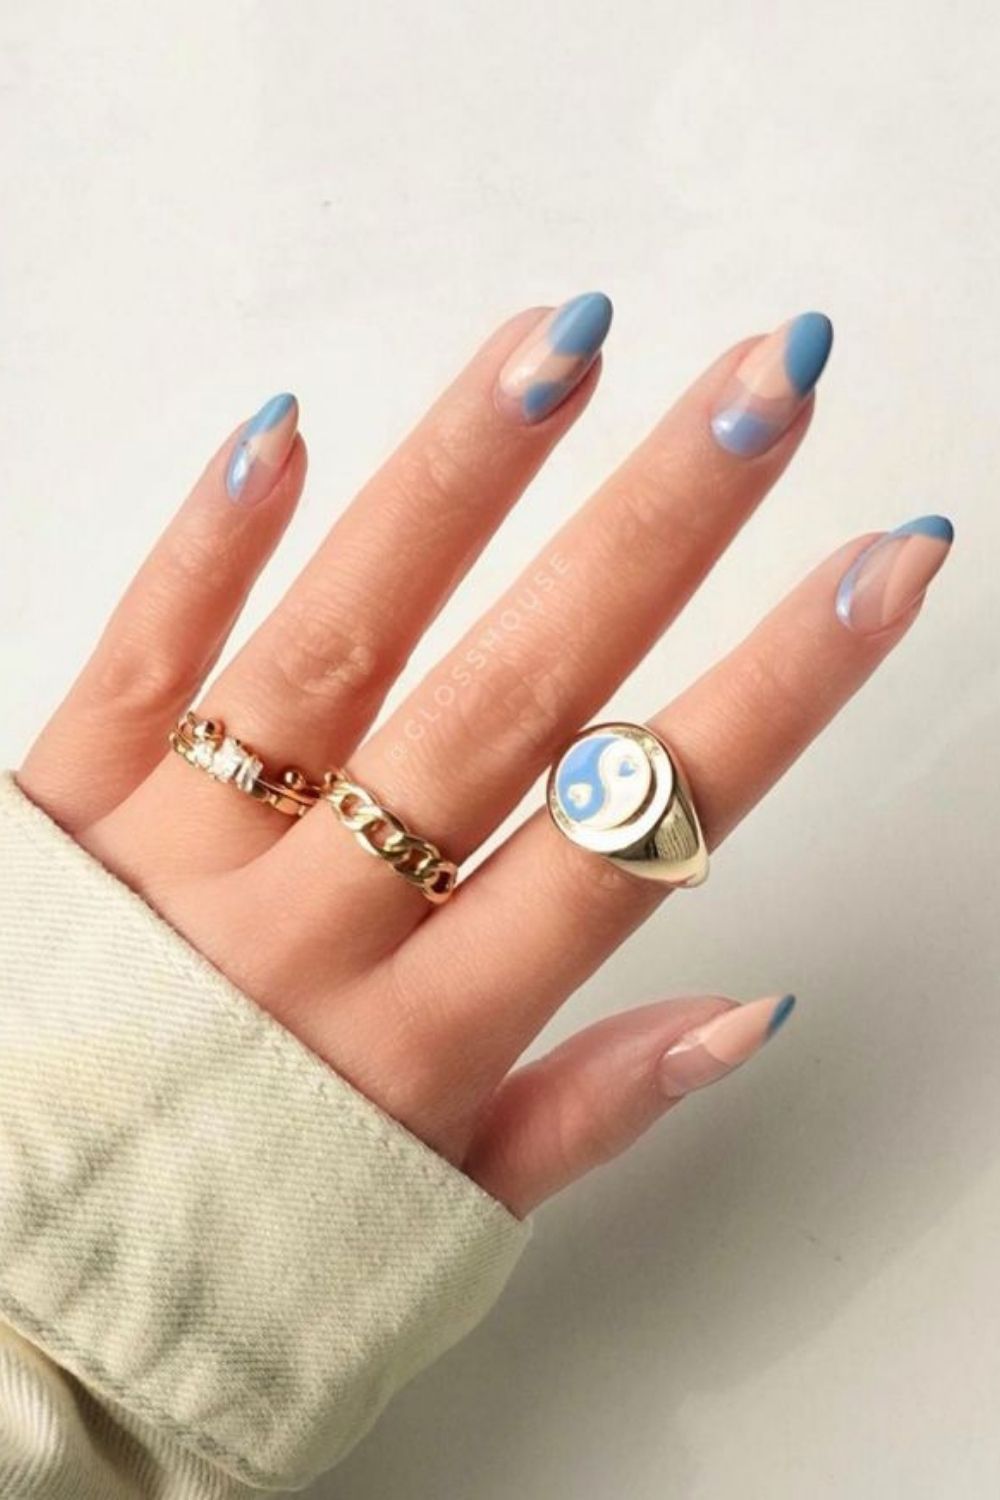 27 Aesthetic Nails Inspiration: Designs and Ideas to Show Your Nail Artist